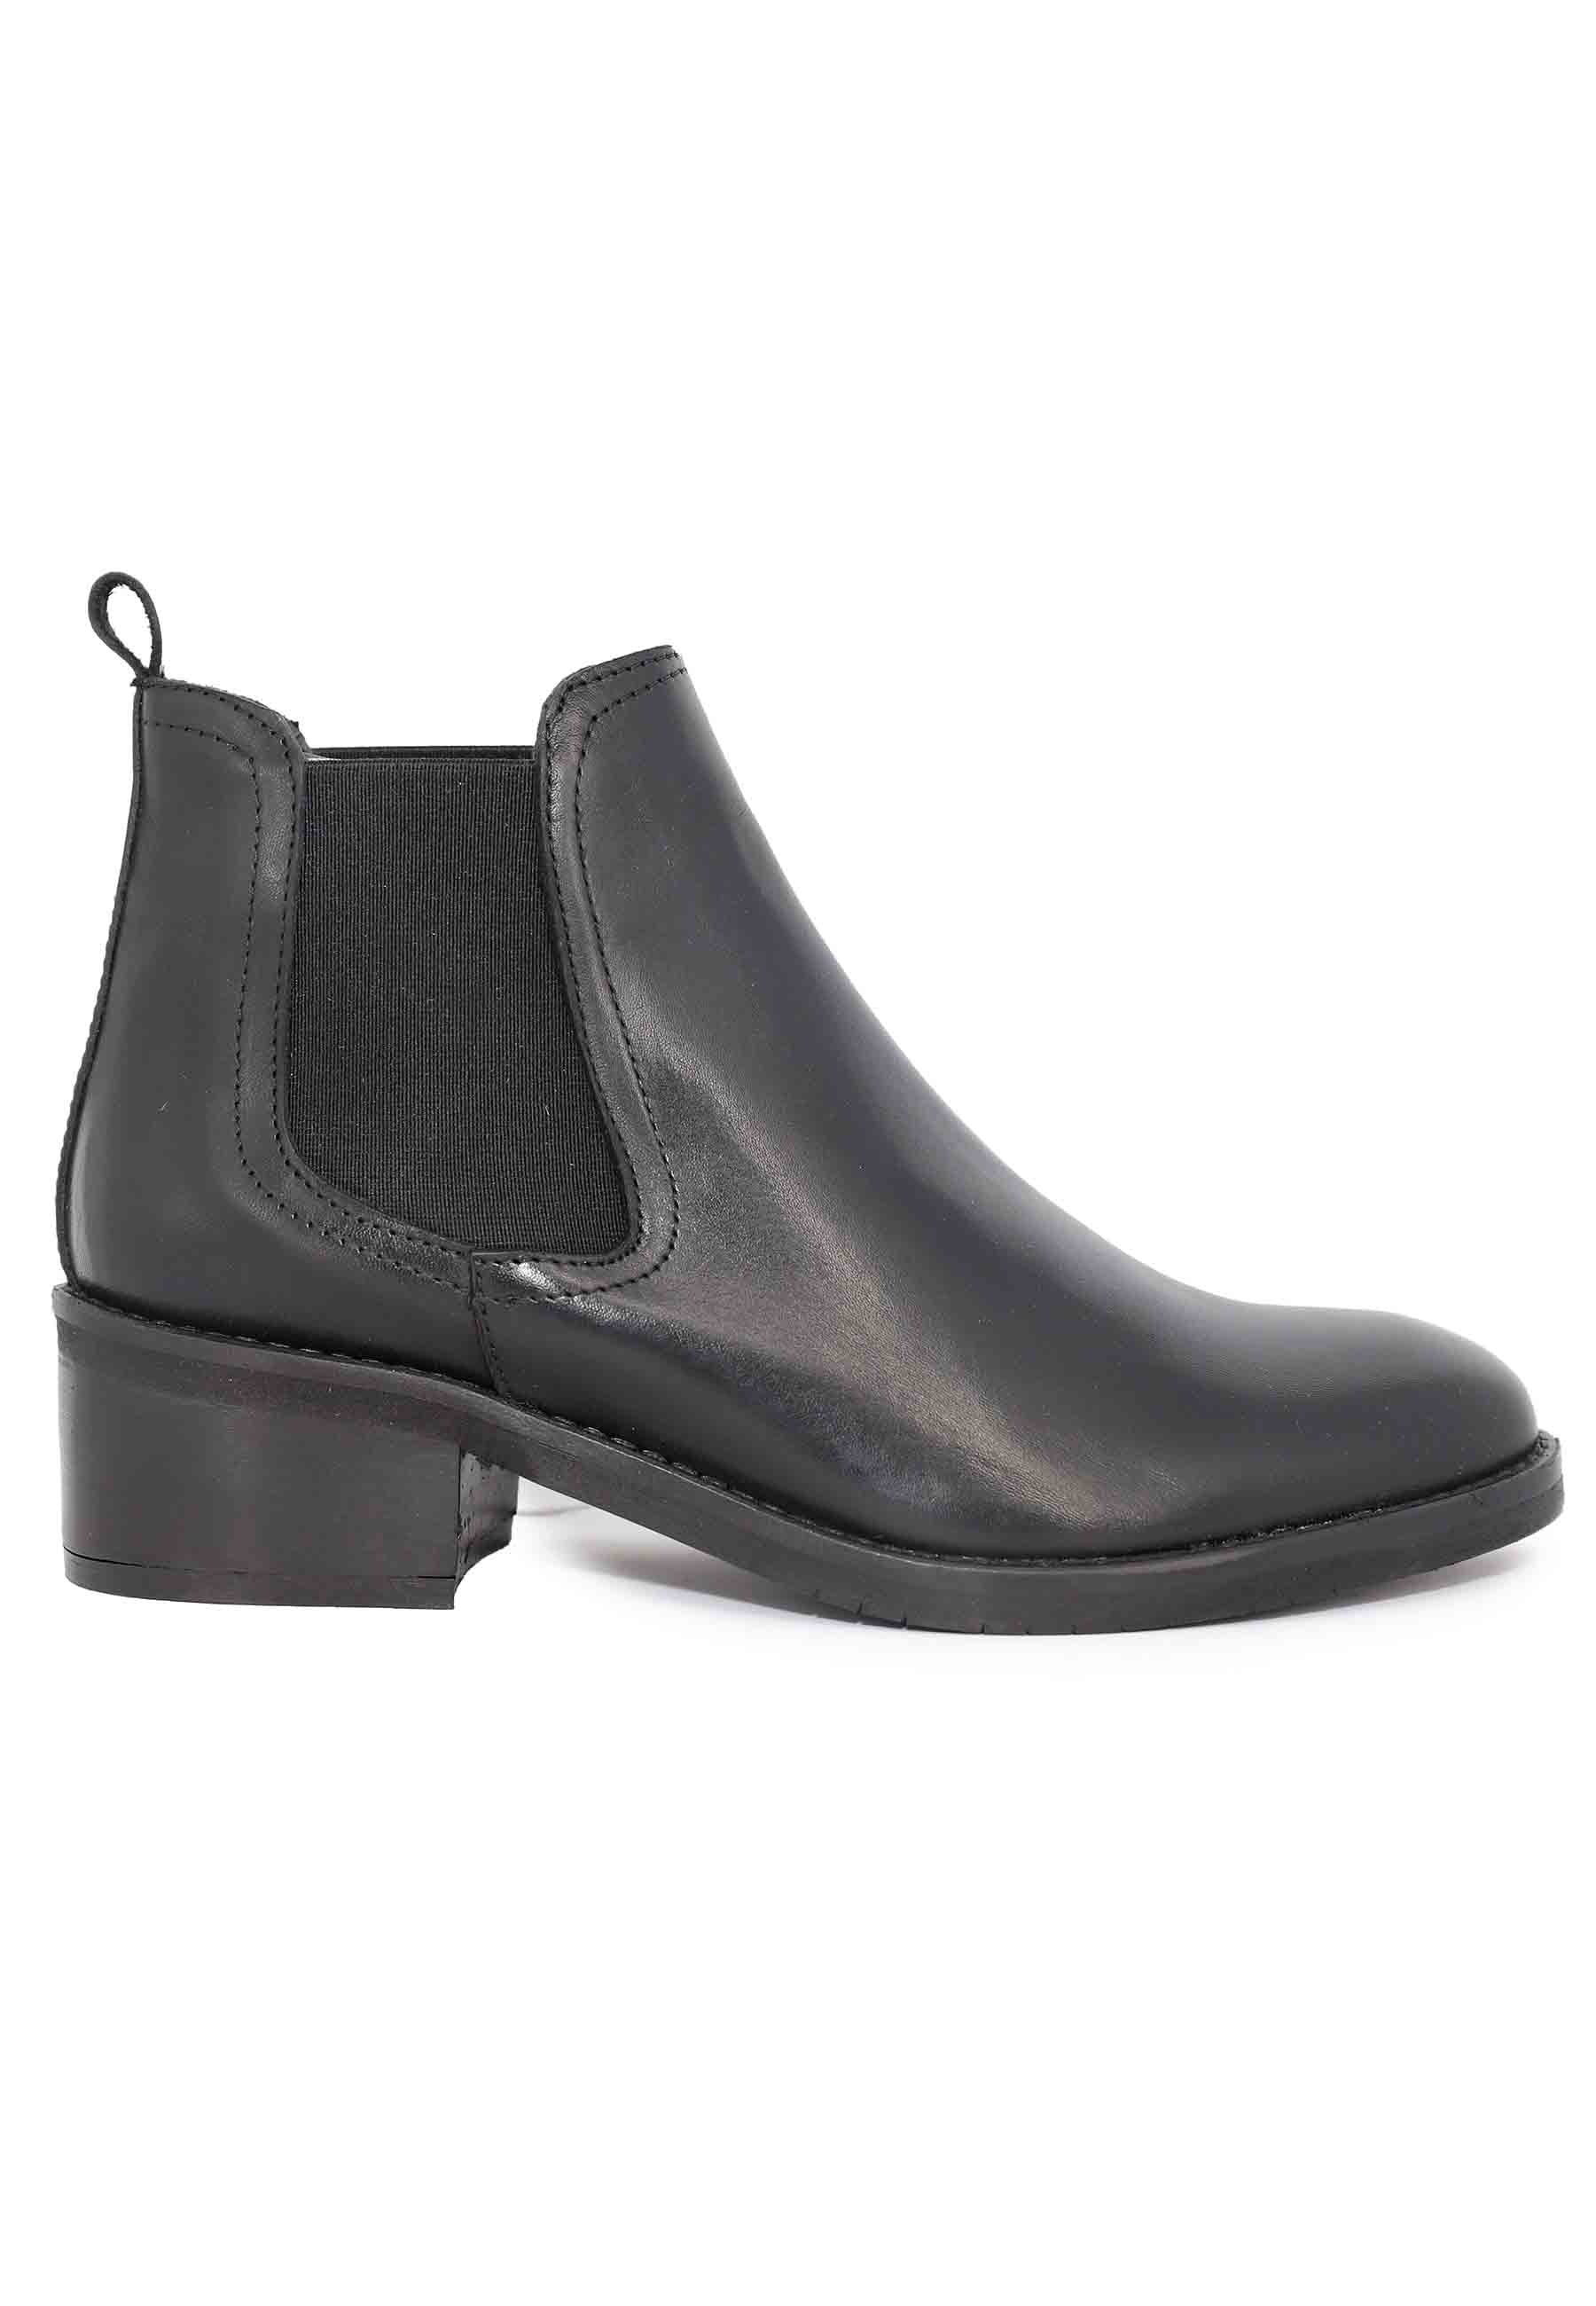 Black leather chelsea boot with round toe and low heel